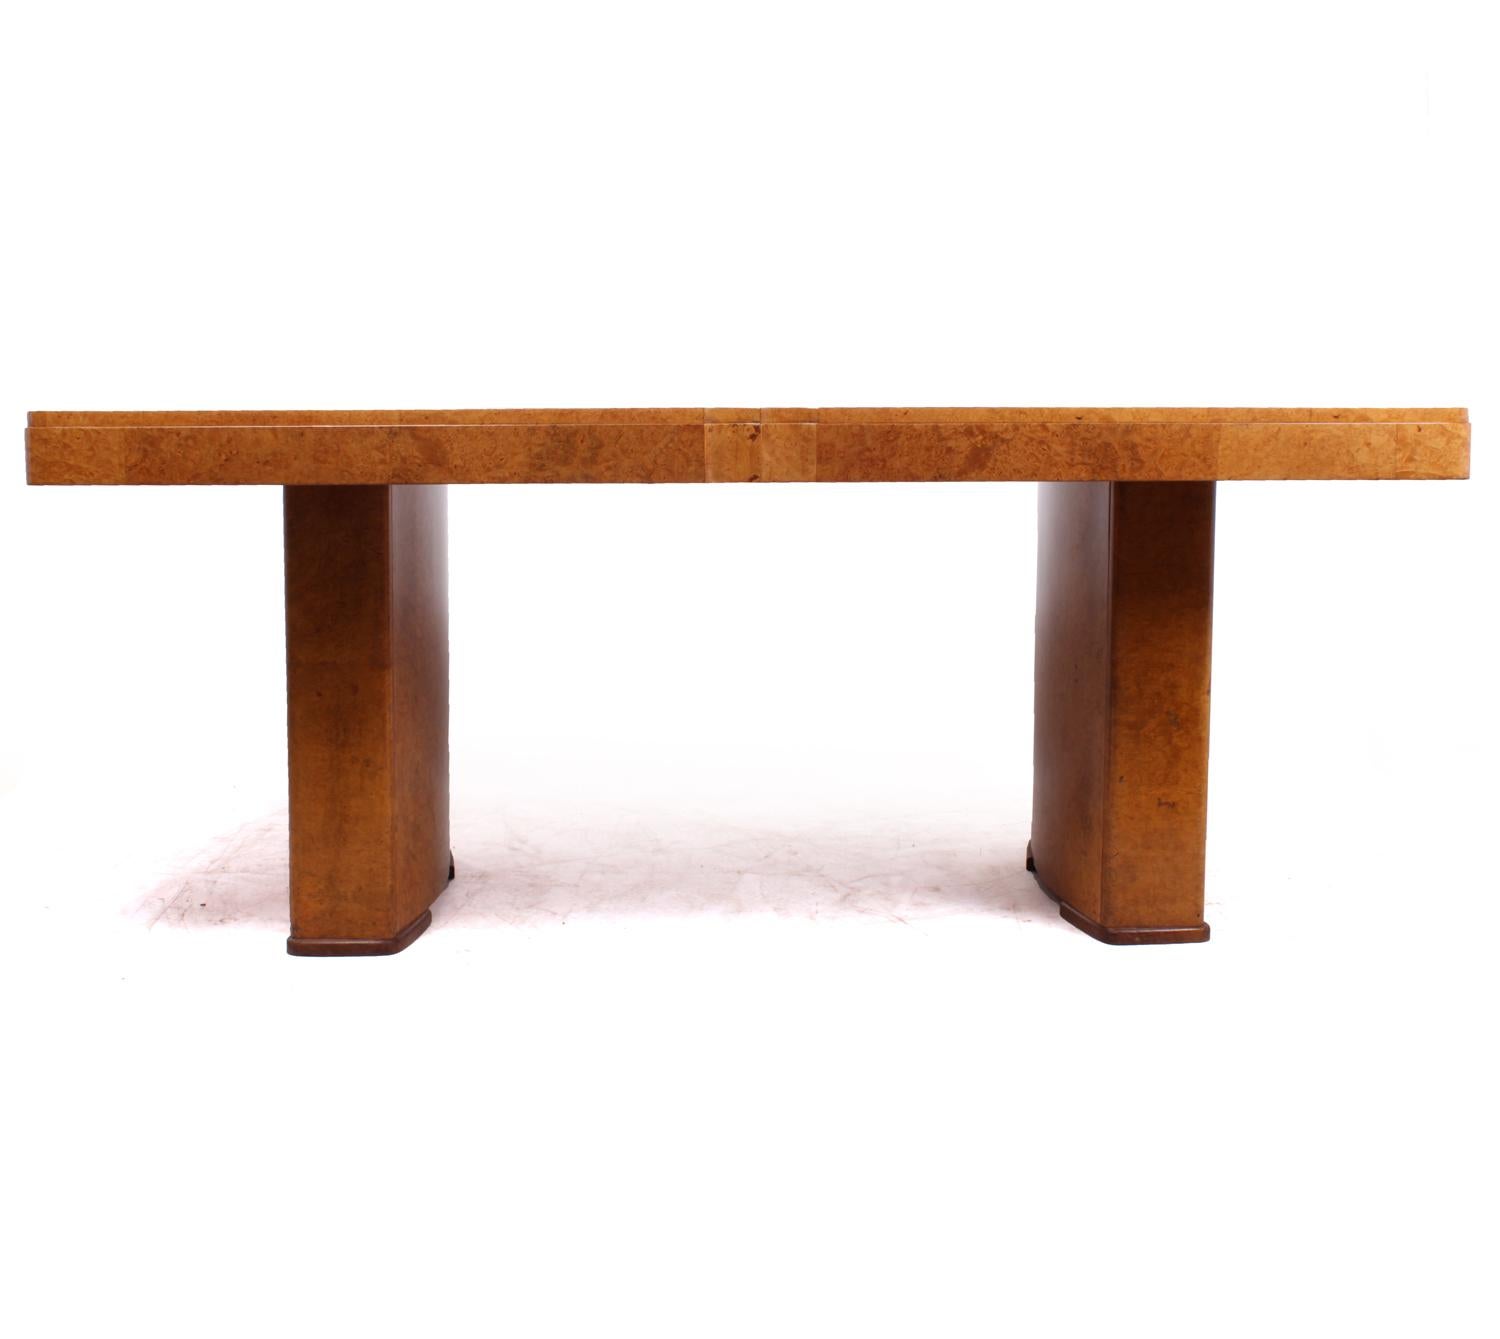 Art Deco dining table in burr maple
This burr maple dining table will comfortably seat 6 people it has two con-caved pedestals that are also burr maple, the table is in very good condition throughout and the top has been fully hand polished

Age: